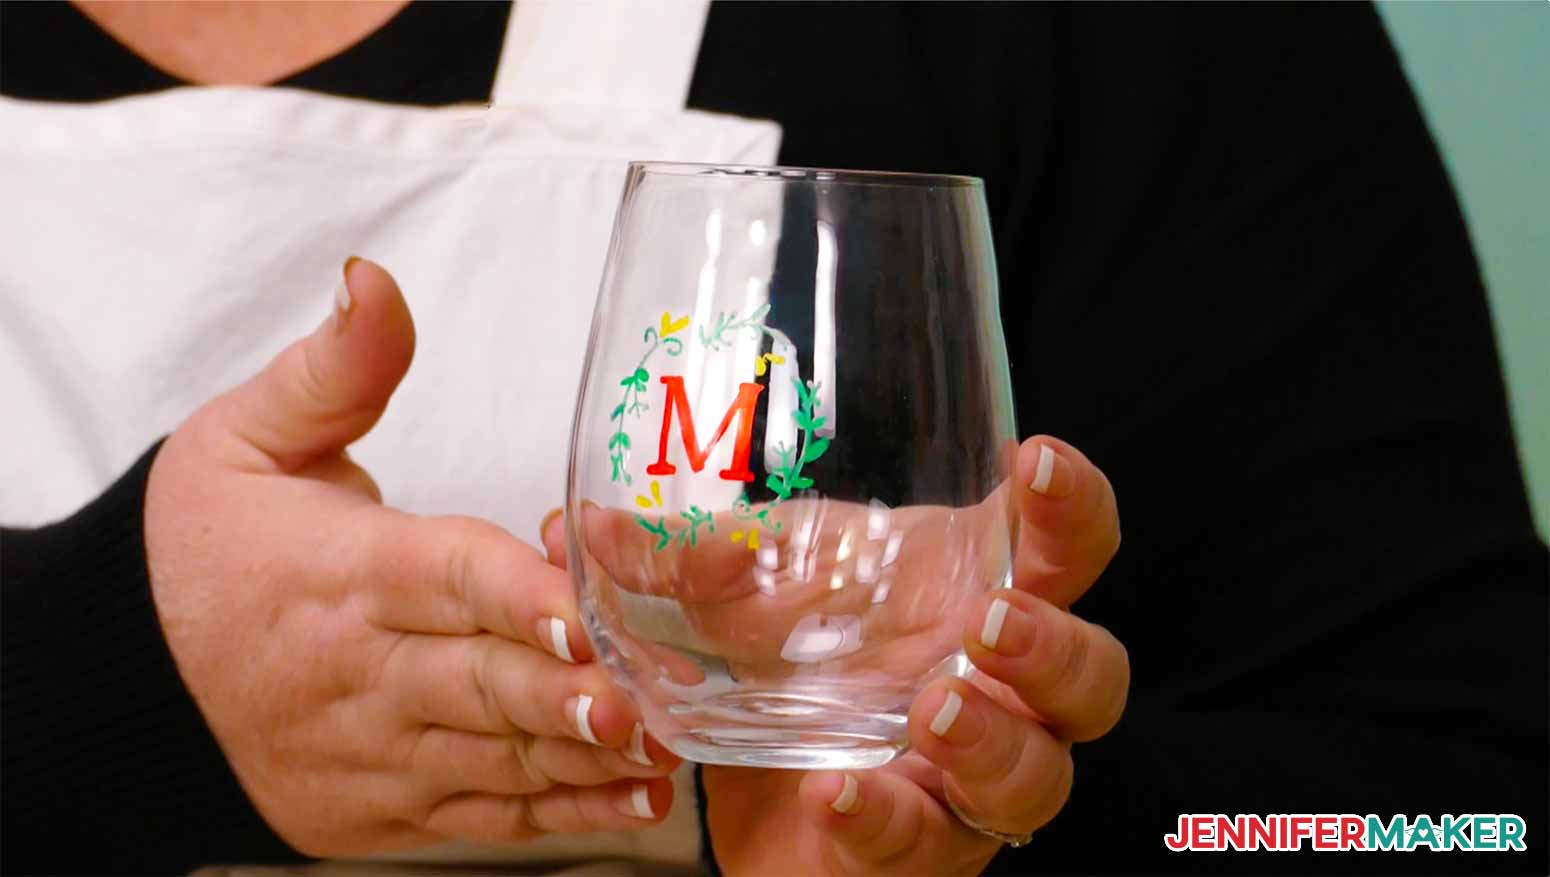 A wine glass with color glass etching of a monogram wreath